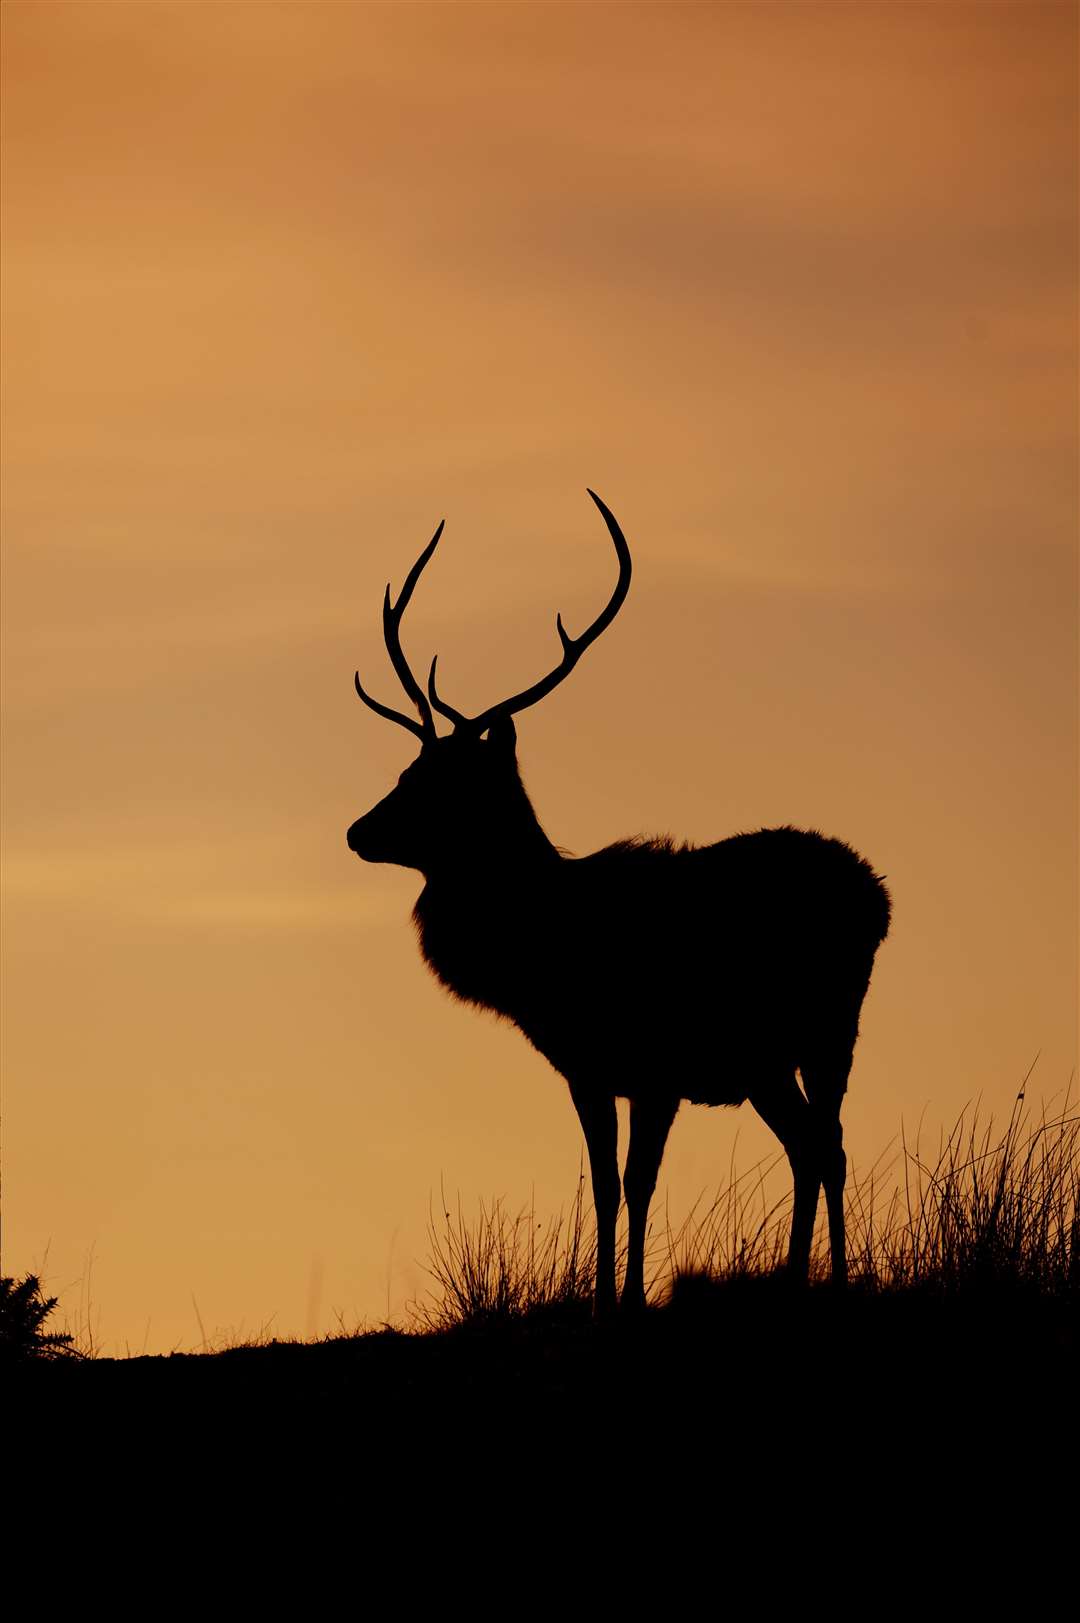 Most deer collisions happen from early evening through to midnight and between 6am and 9am.